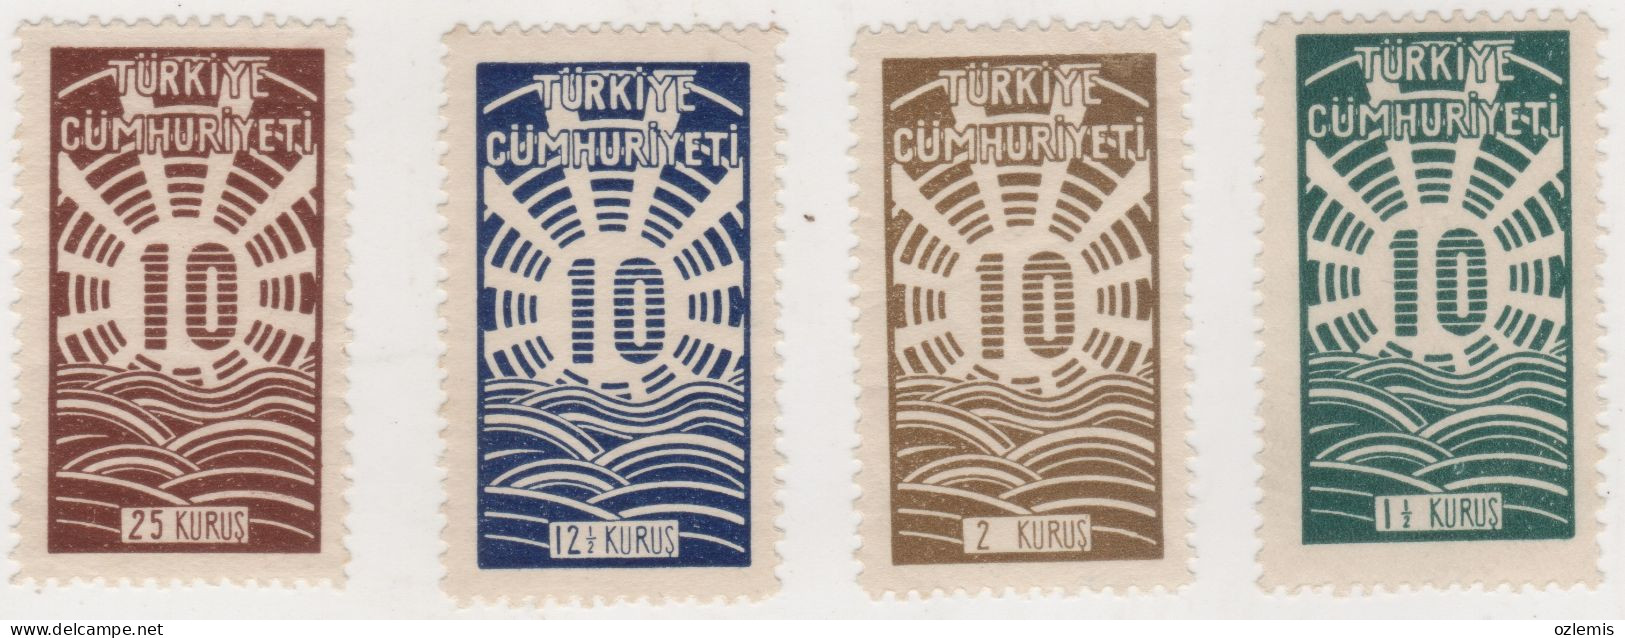 TURKEY,TURKEI,TURQUIE ,1933 ,COMMEMORATIVE STAMPS FOR THE 100TH ANIVERSARY OF THE REPUBLIC,,,STAMP,MNH - Neufs